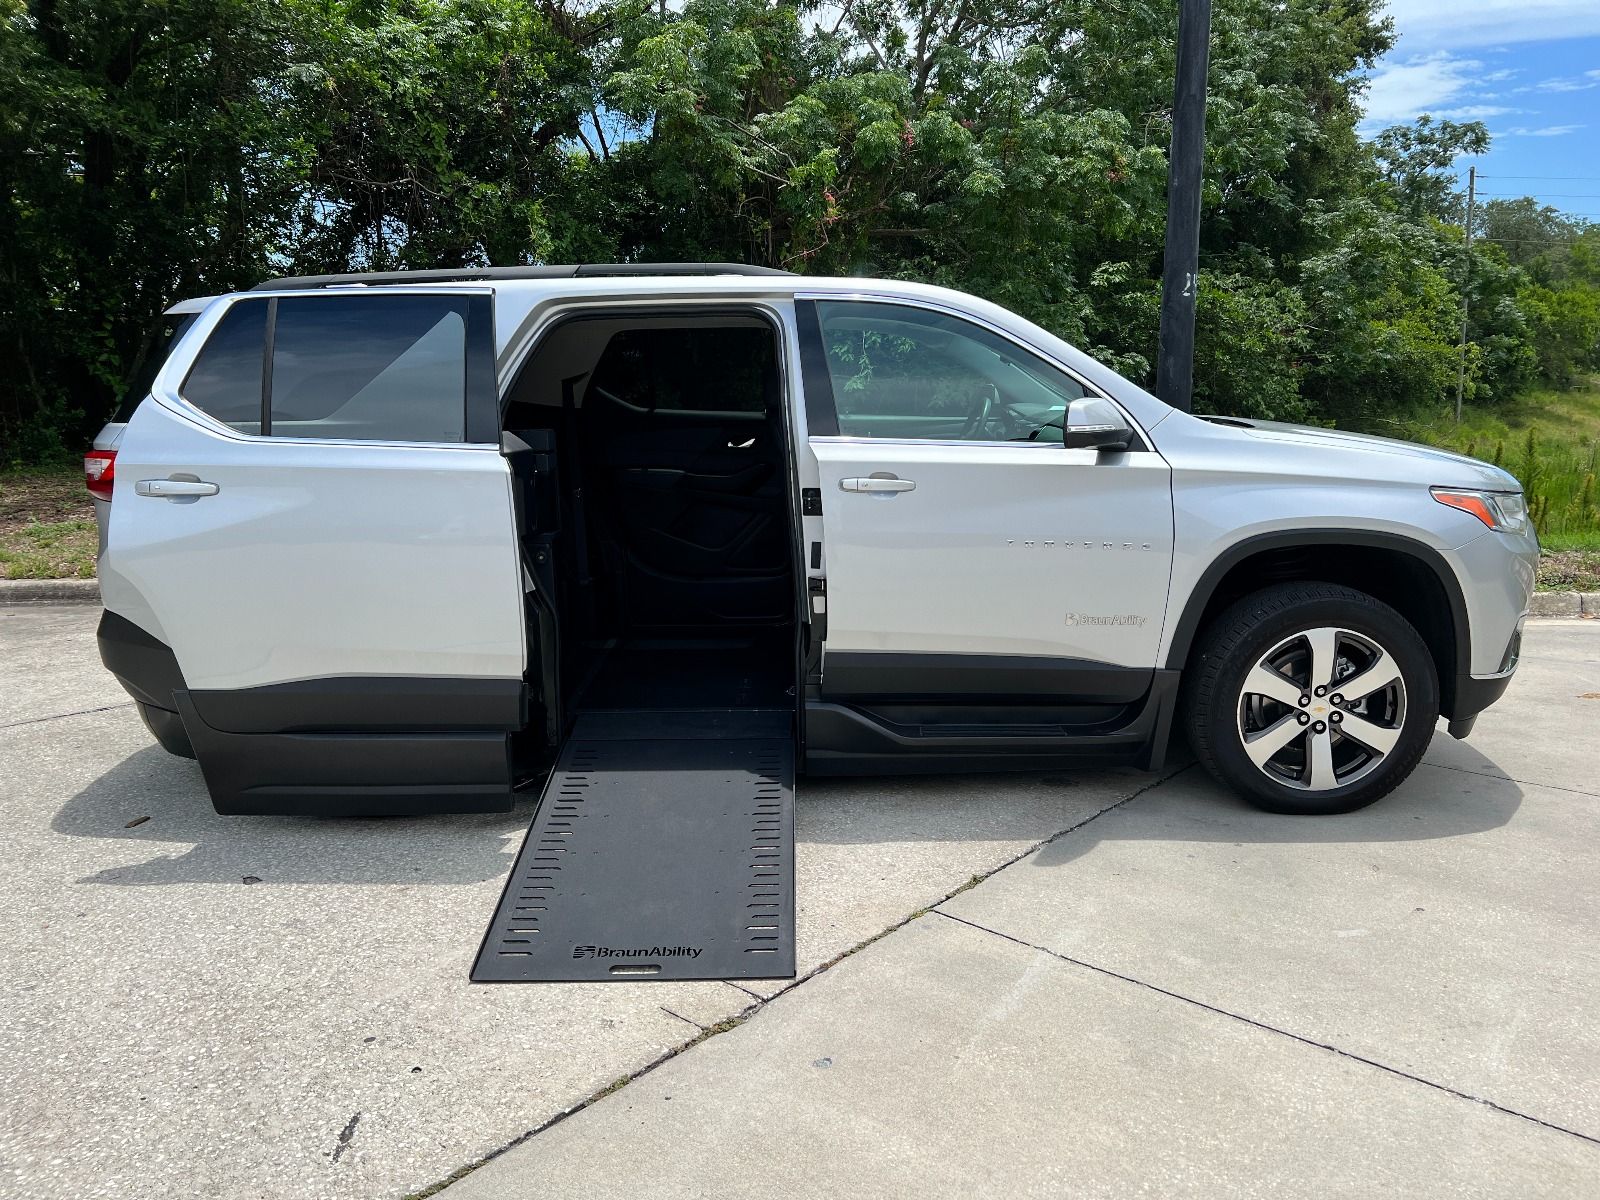 Silver Chevrolet Traverse Wheelchair Accessible SUV with ramp deployed from passenger rear door.